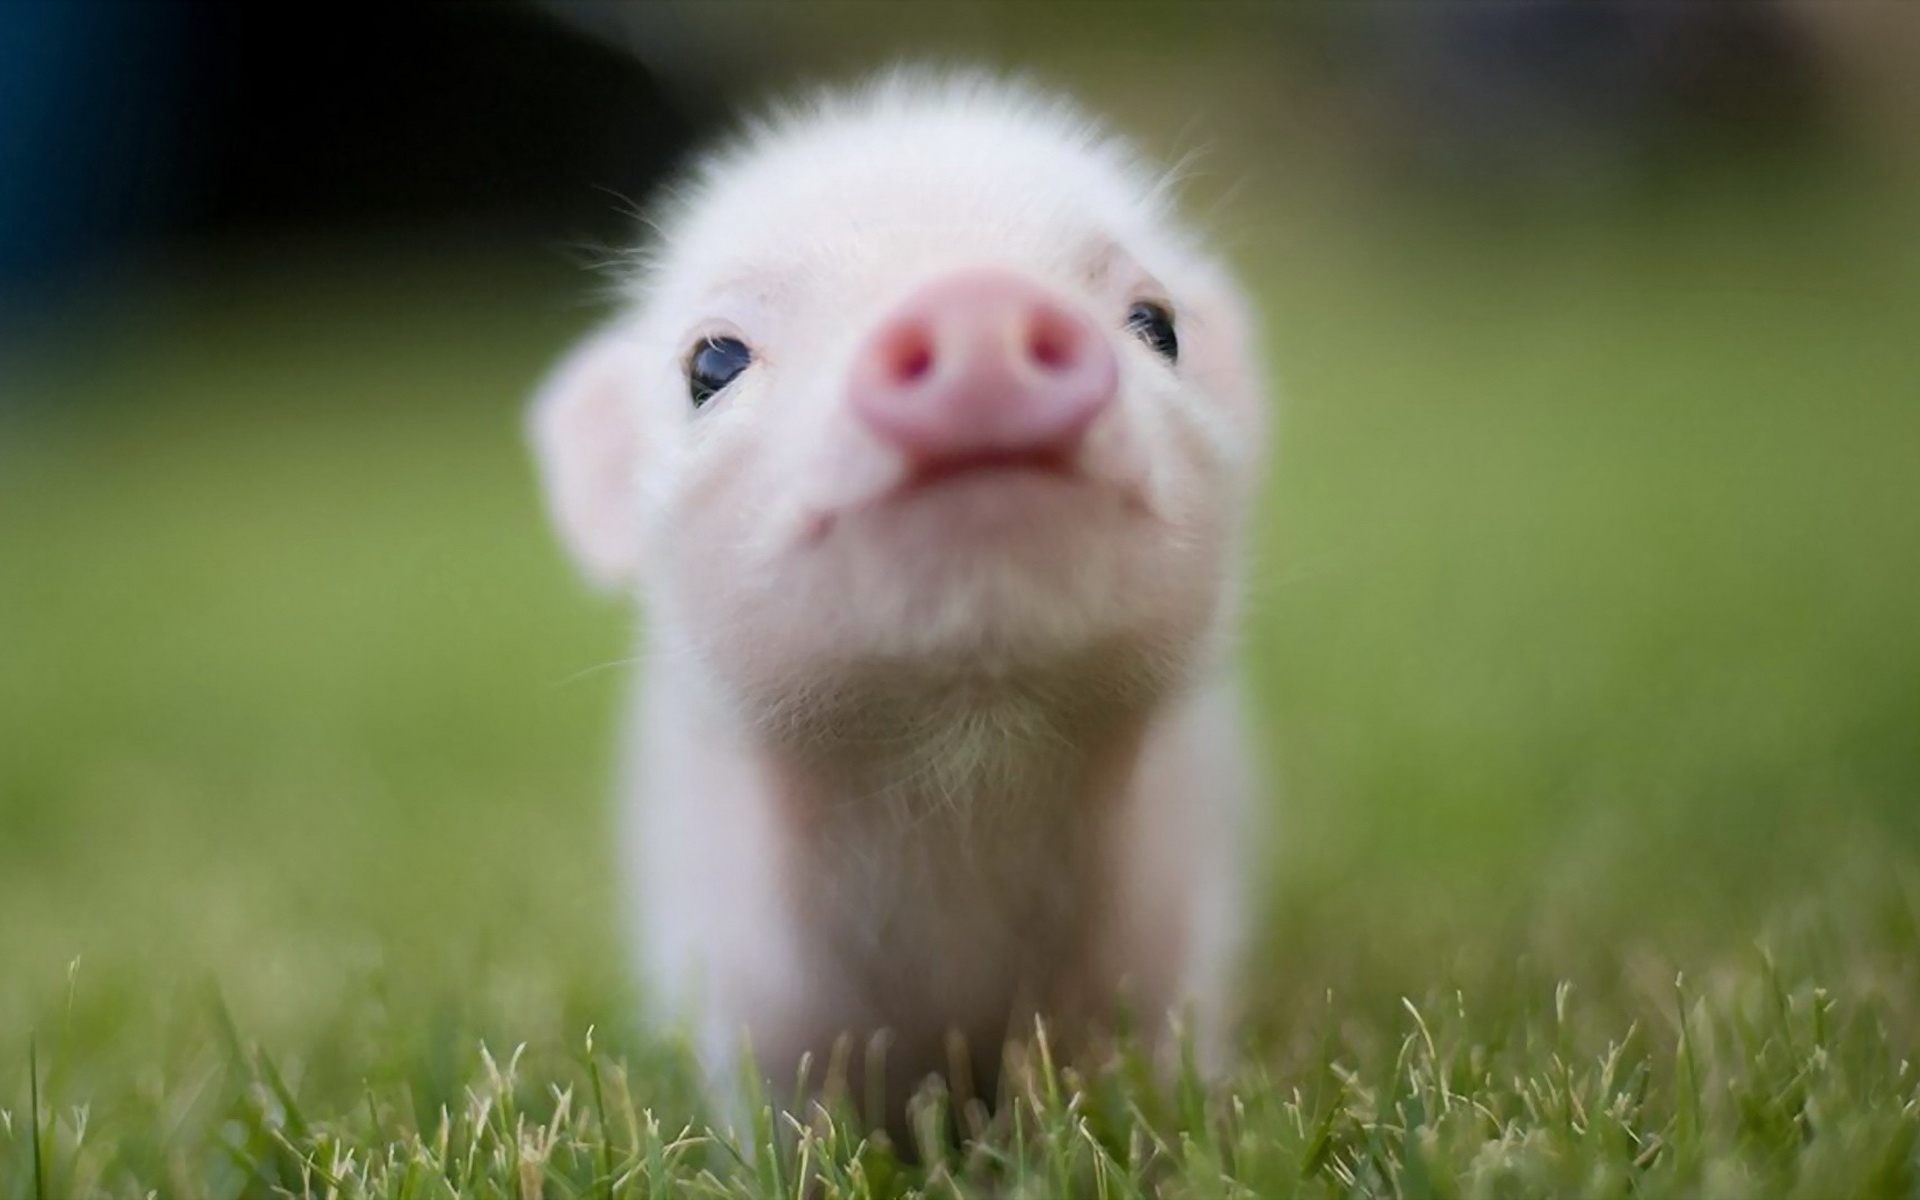 Little pig wallpapers and images   wallpapers pictures photos 1920x1200